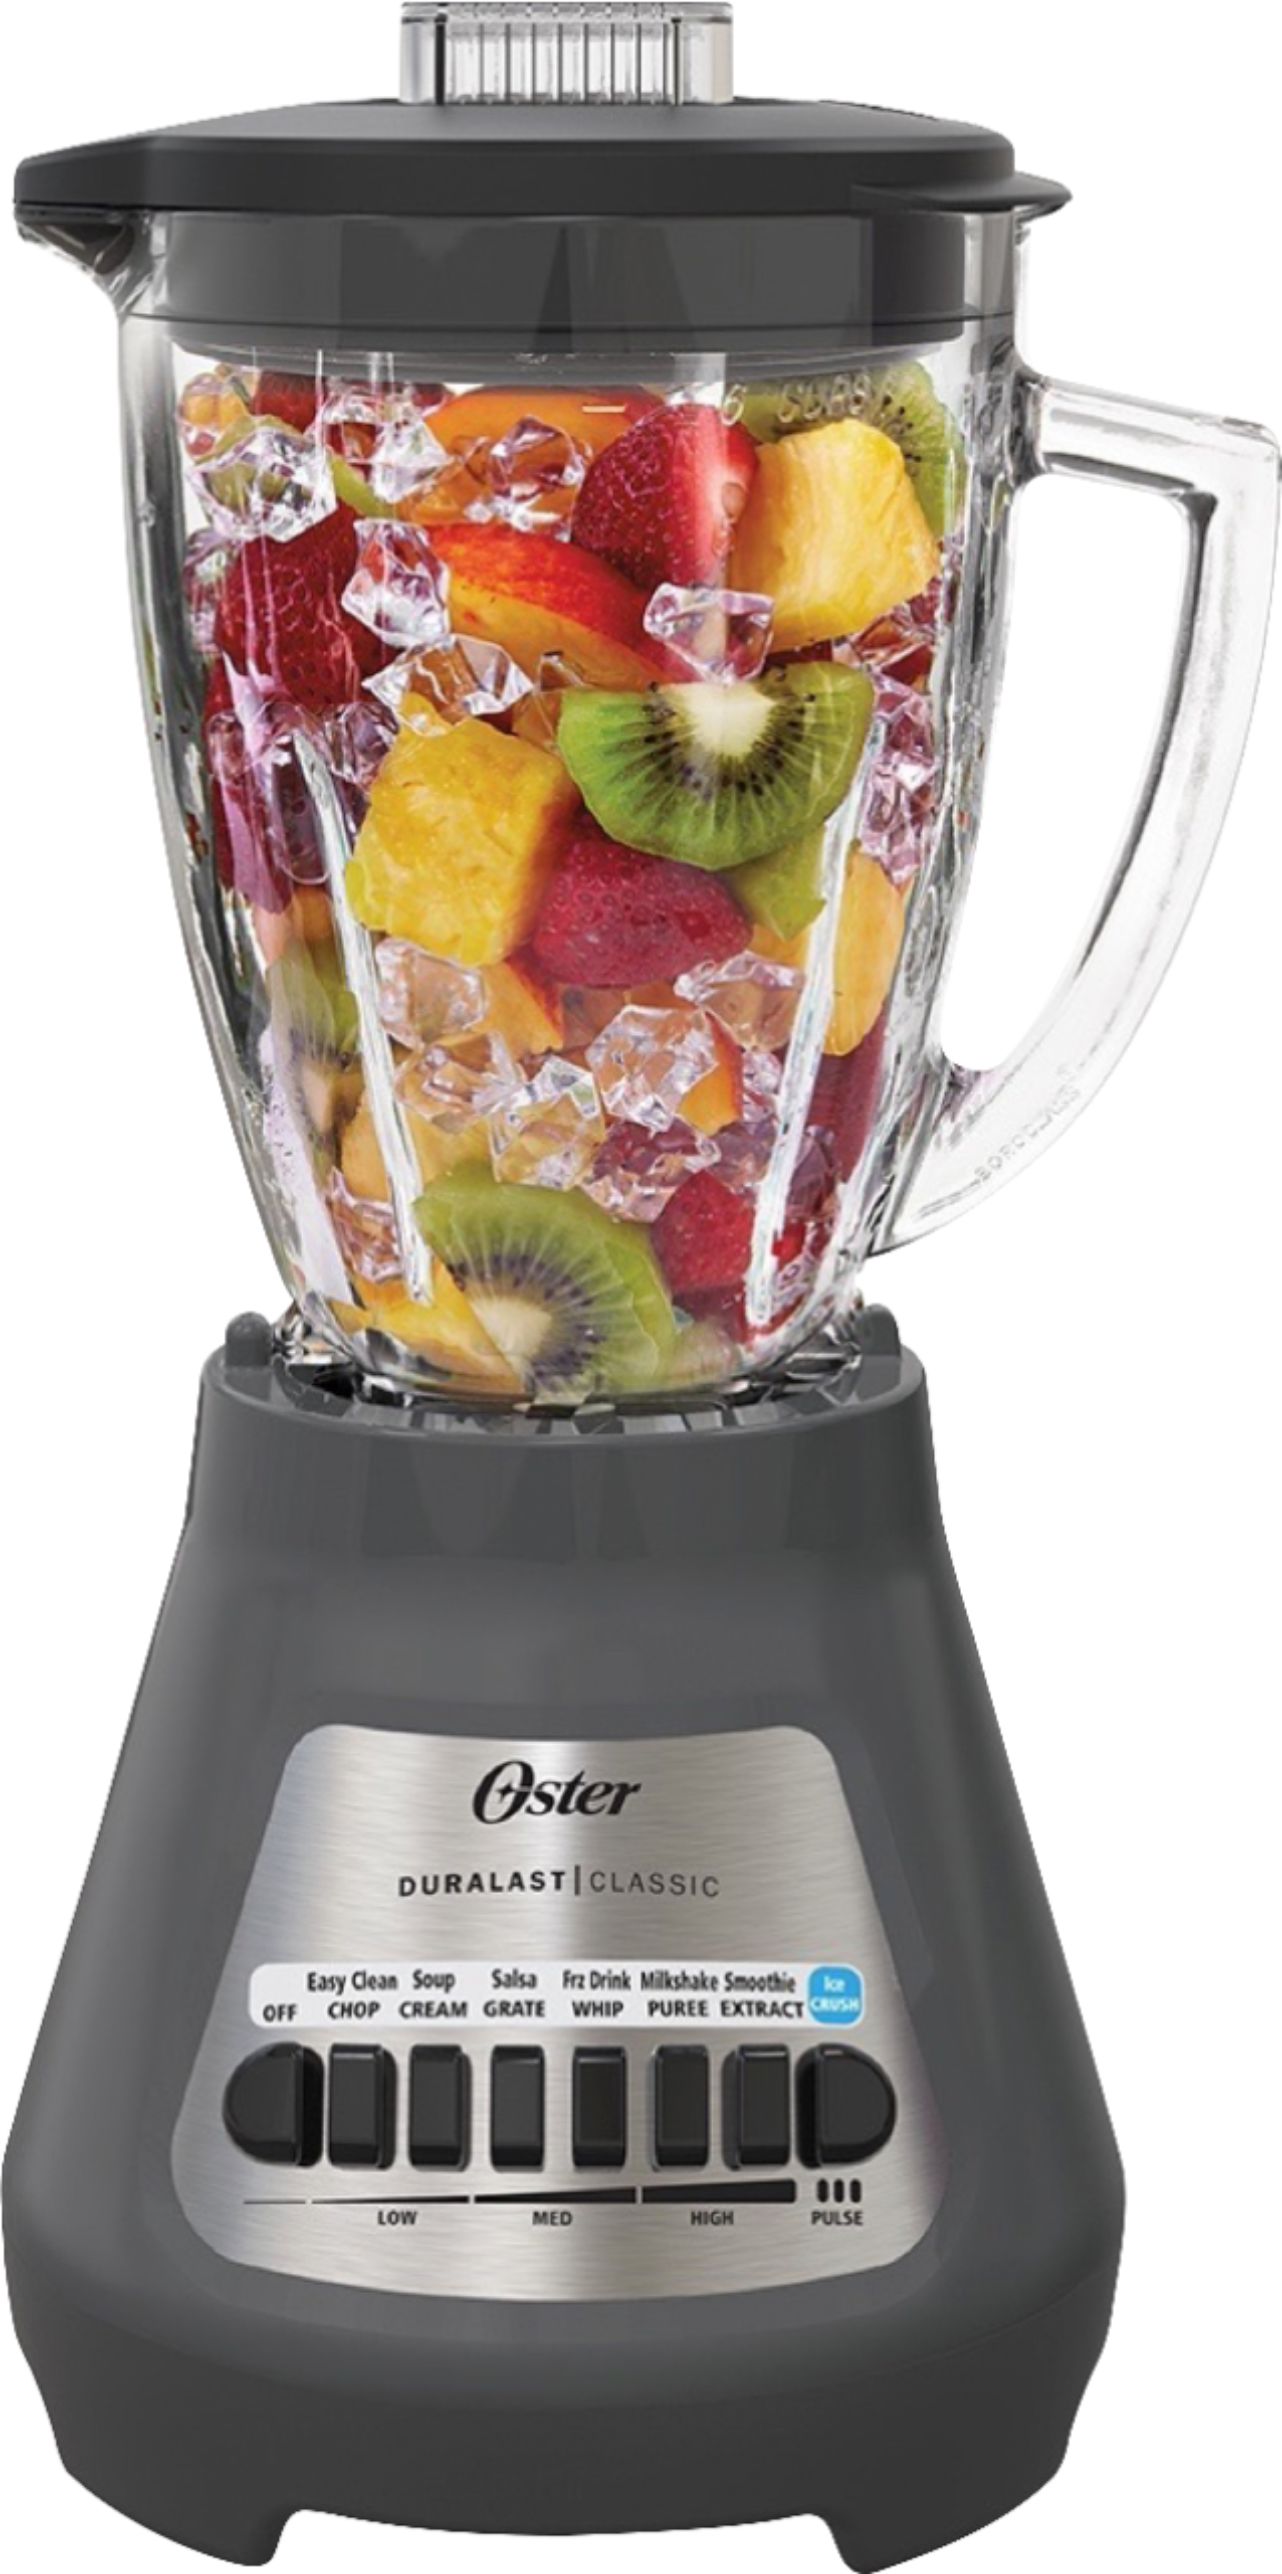 Oster Classic Series 2-in-1 6 Cup Red Blender With Smoothie Cup